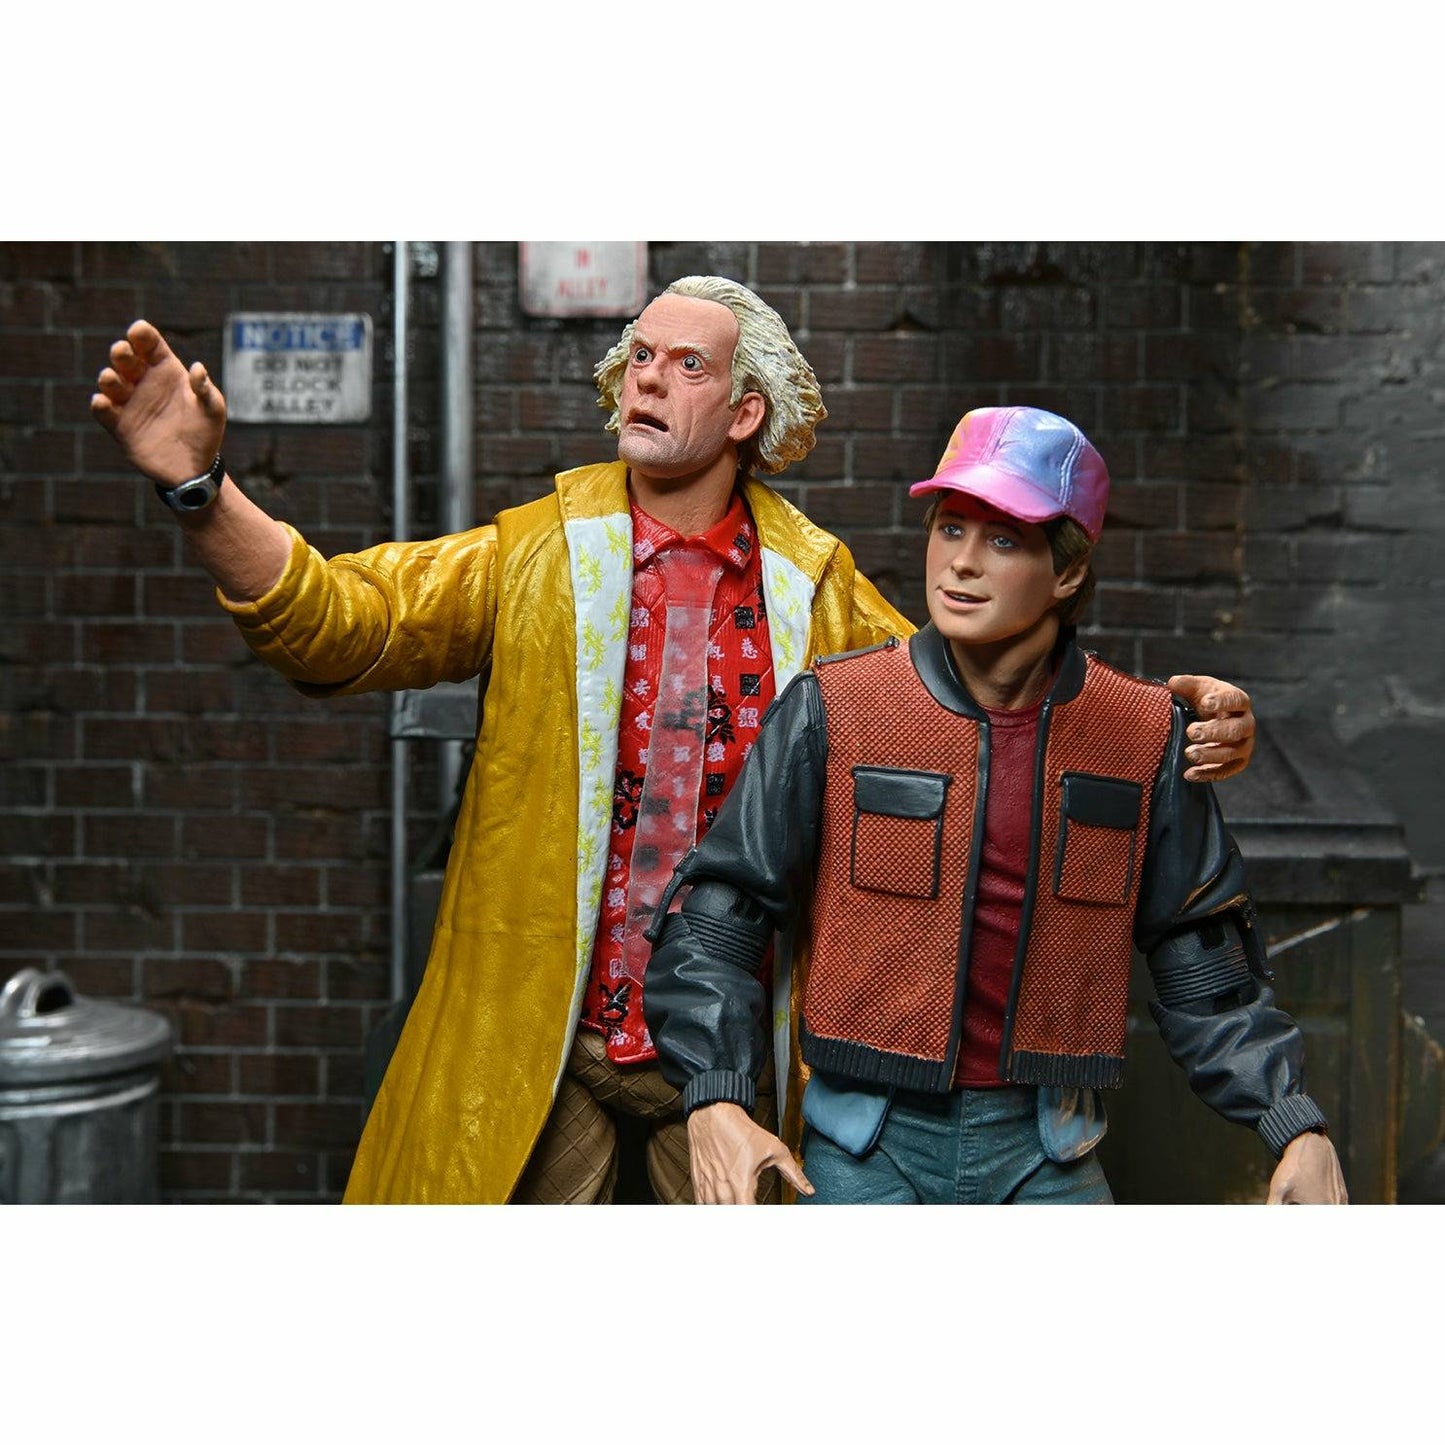 NECA Back to the Future Part II 7" Scale Action Figure - Ultimate Doc Brown (2015) Action Figure NECA